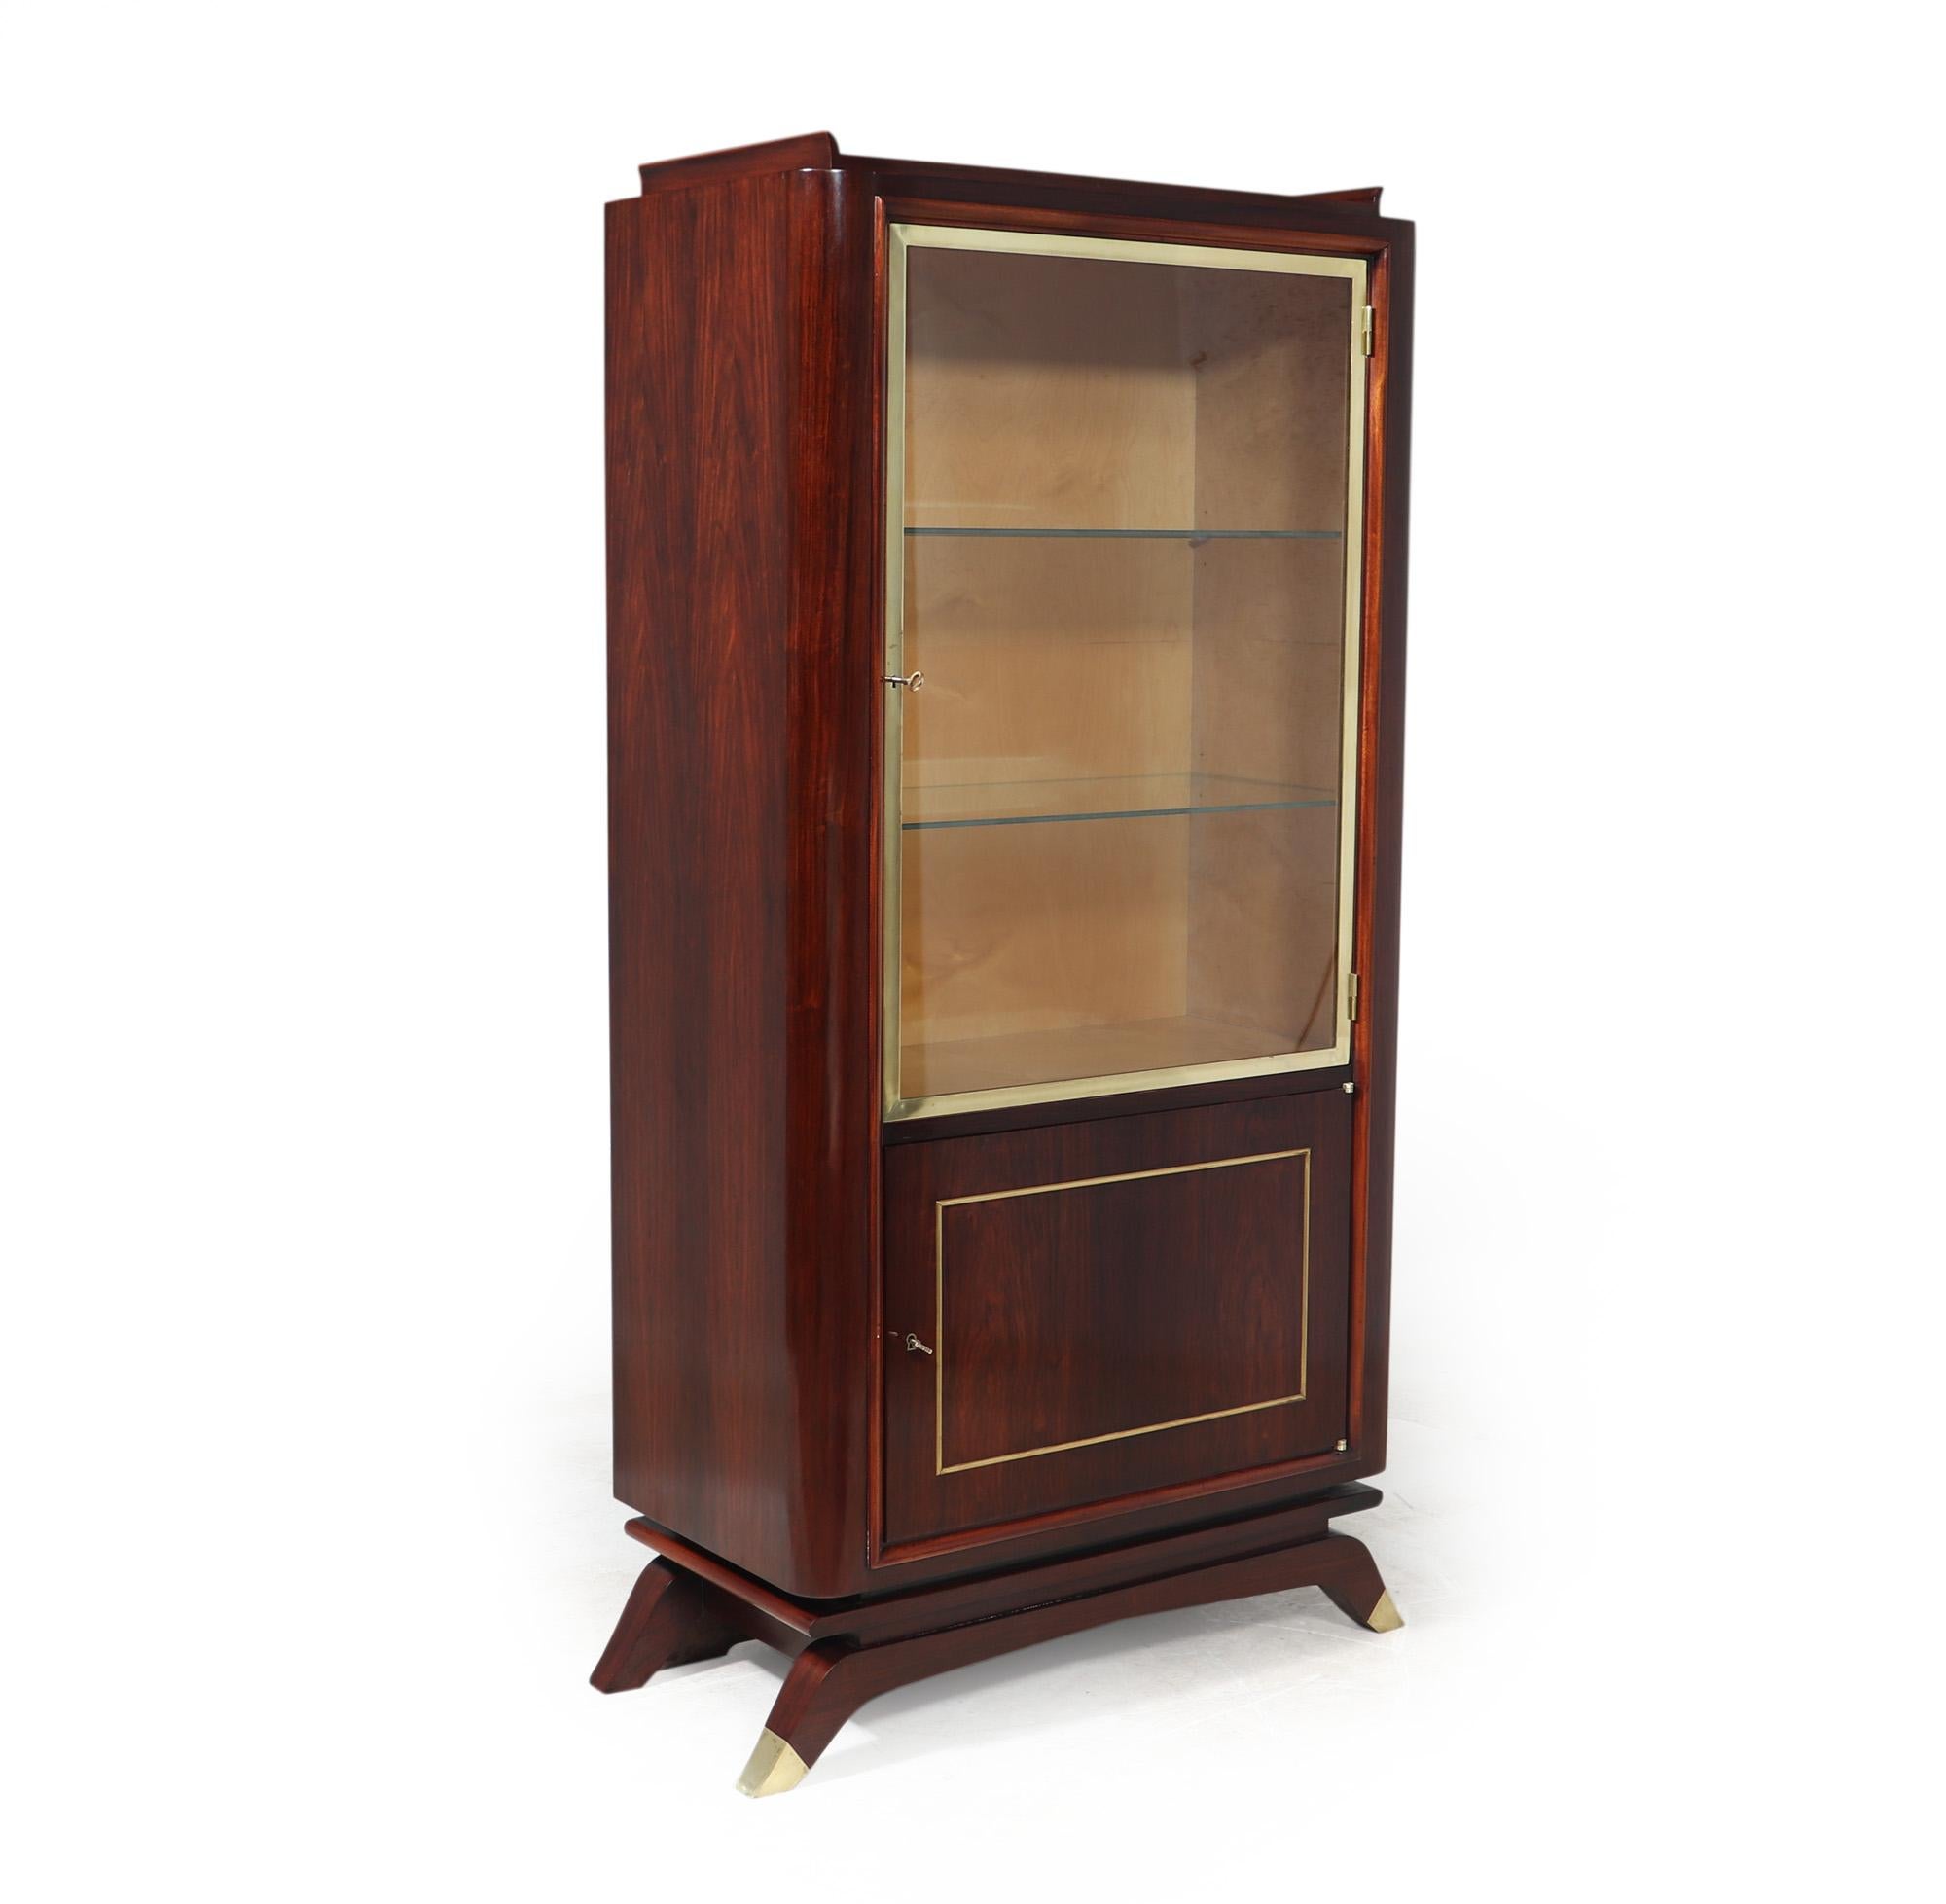 ART DECO DISPLAY CABINET 
A French Art Deco display cabinet ( vitrine ) in rosewood produced in c1925 and very much in the manner of Maison Dominique, the cabinet has a bronze framed glass lockable door with a chestnut lined interior and adjustable